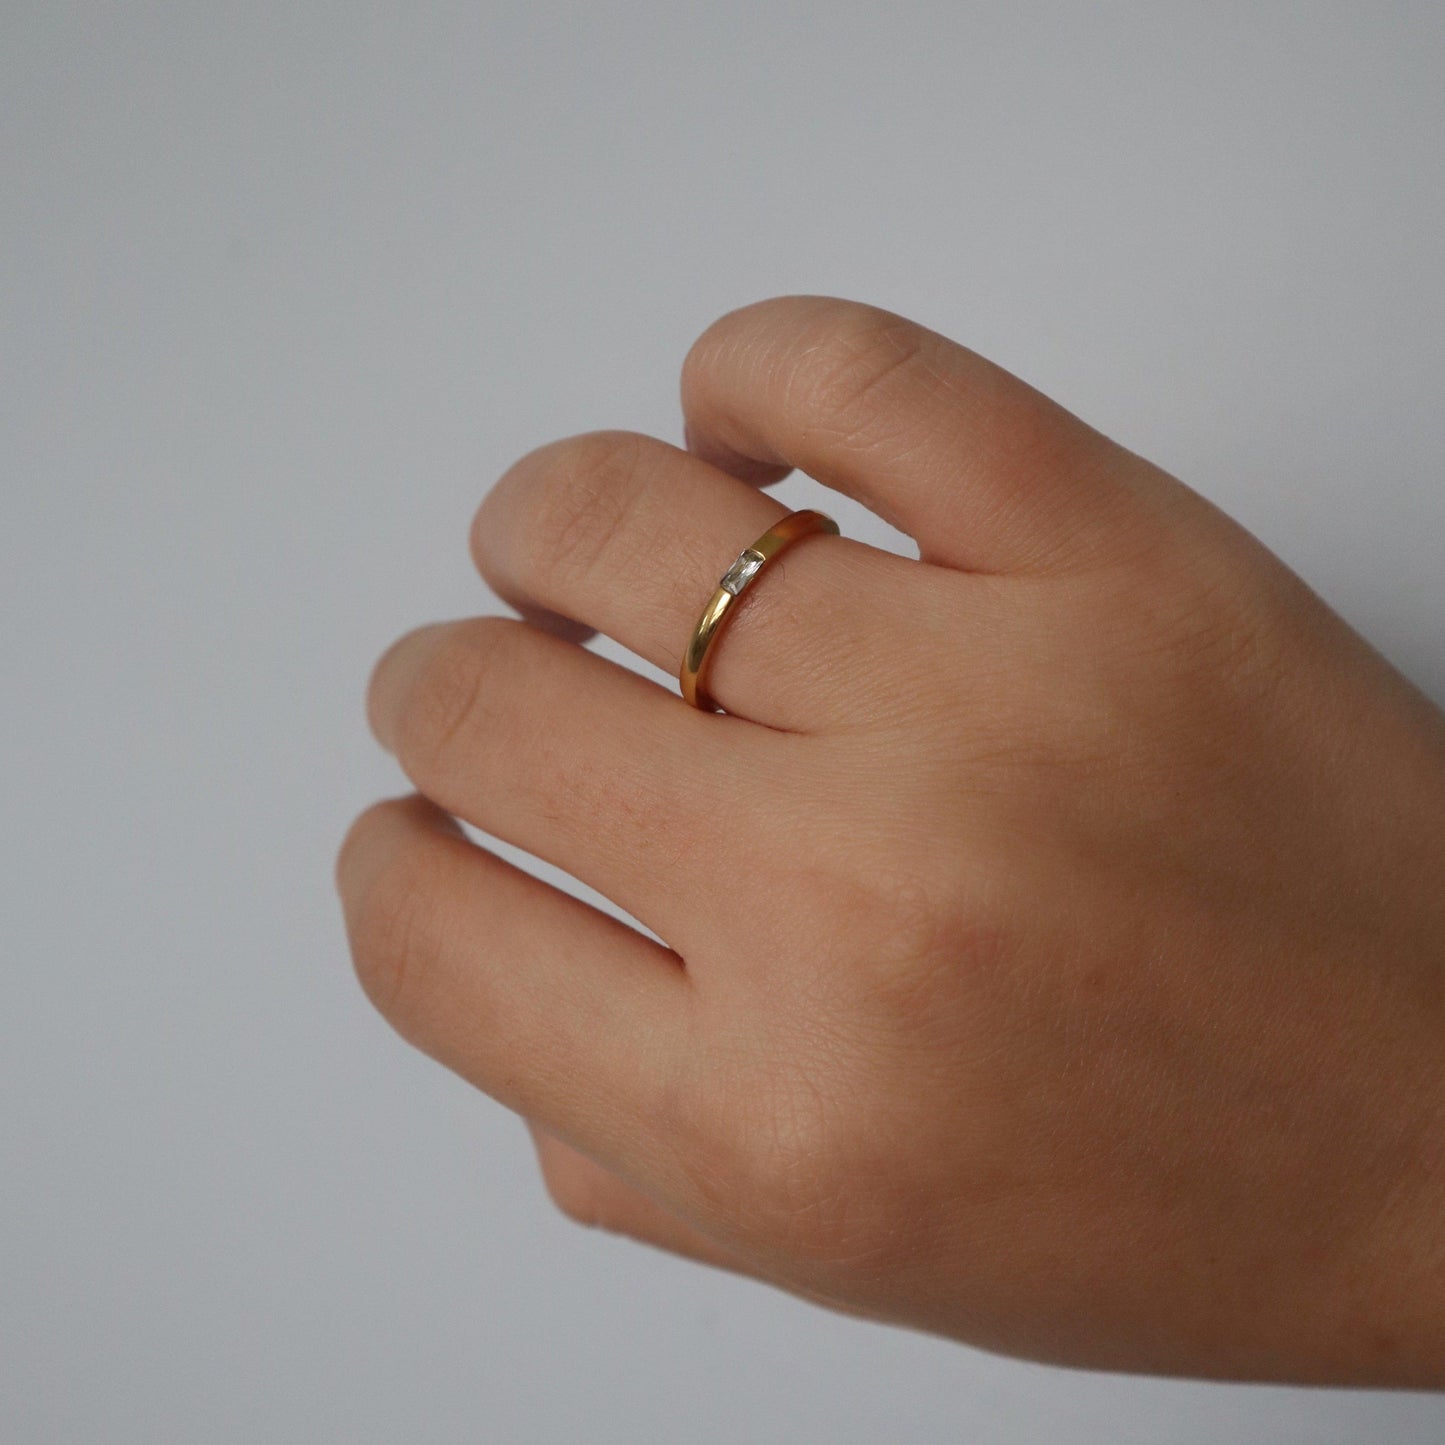 Faye Ring | Dainty Stacking Ring - JESSA JEWELRY | GOLD JEWELRY; dainty, affordable gold everyday jewelry. Tarnish free, water-resistant, hypoallergenic. Jewelry for everyday wear